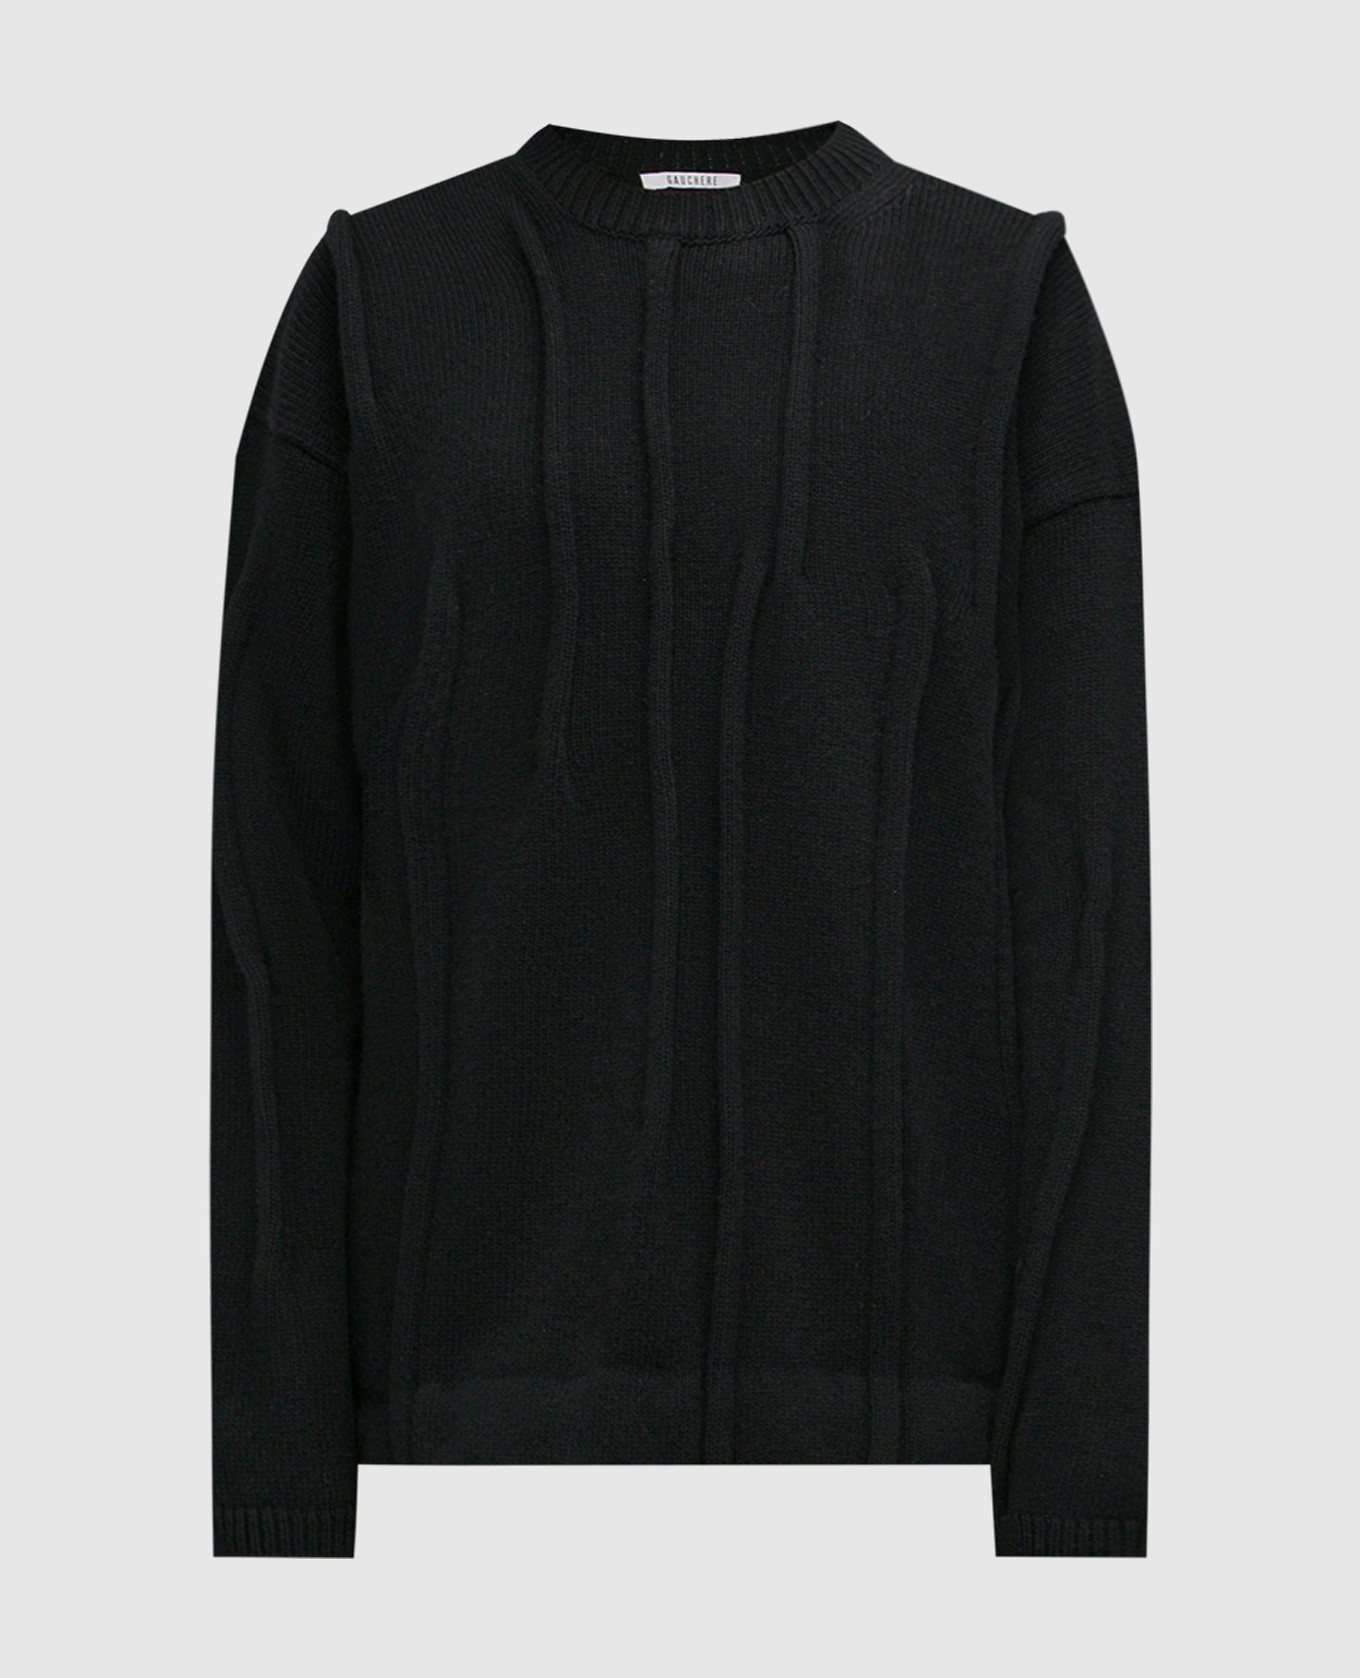 Black sweater made of wool